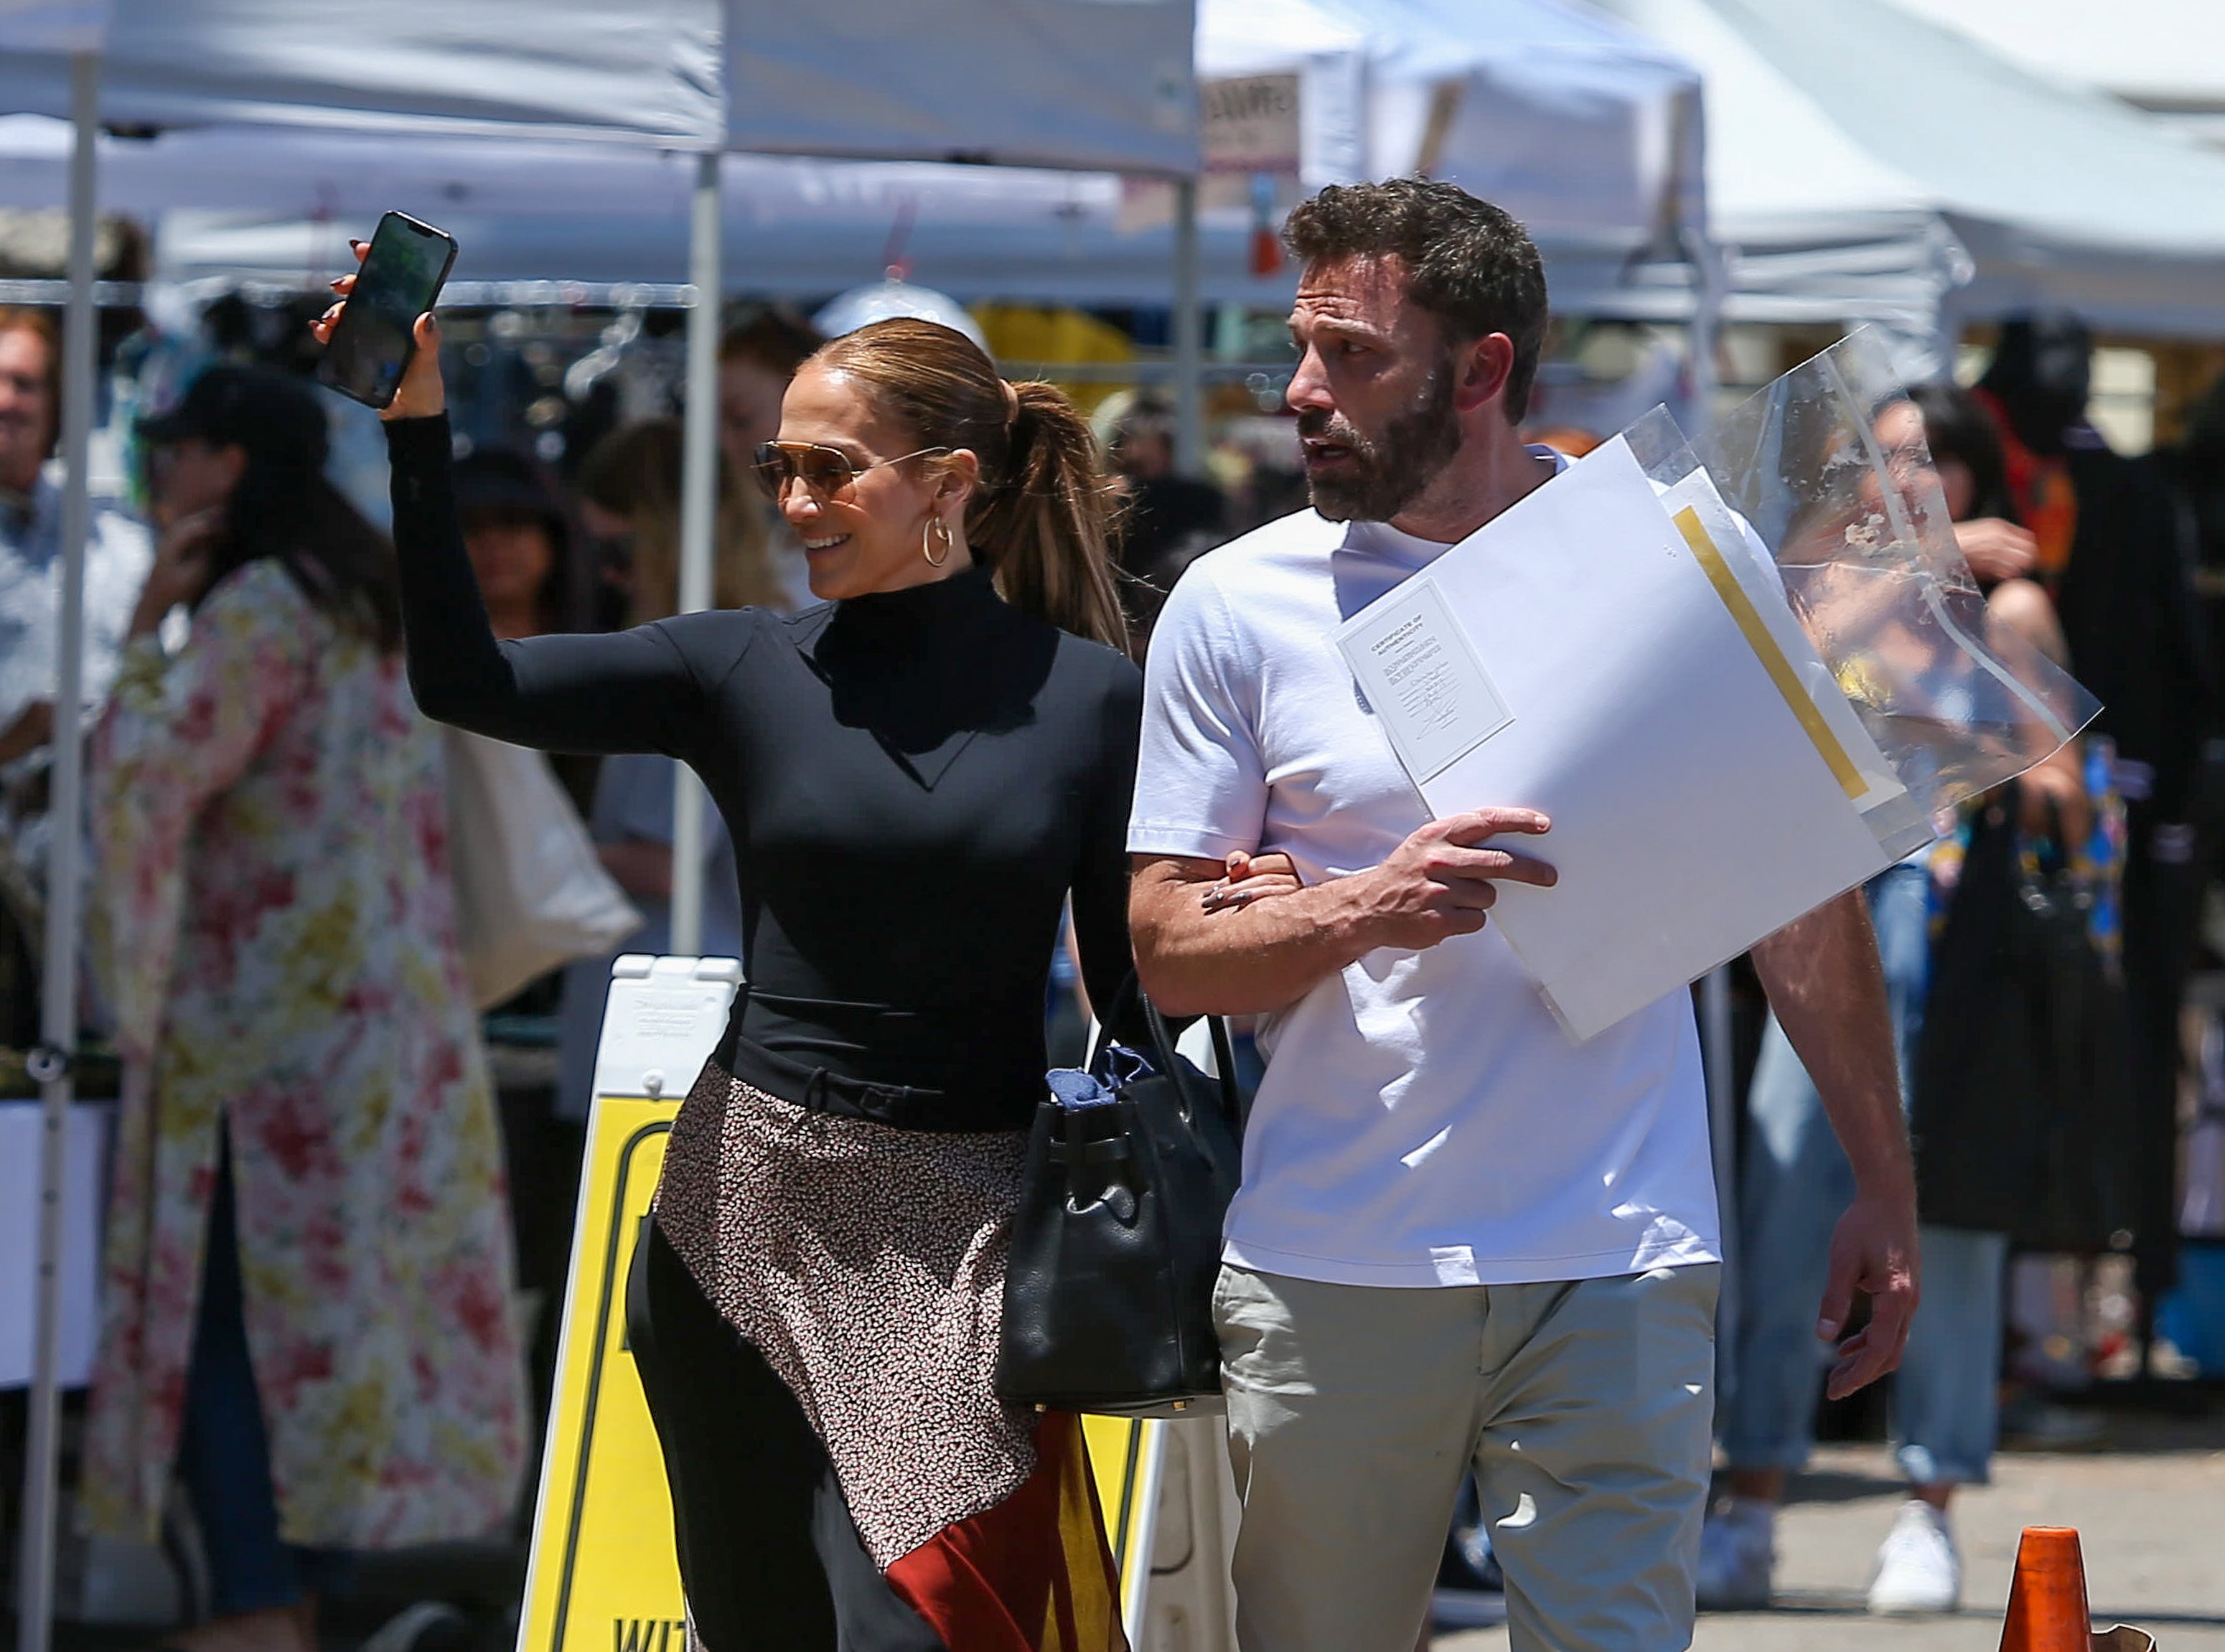 Jennifer Lopez and Ben Affleck seen on July 3, 2022, in Los Angeles, California. | Source: Getty Images